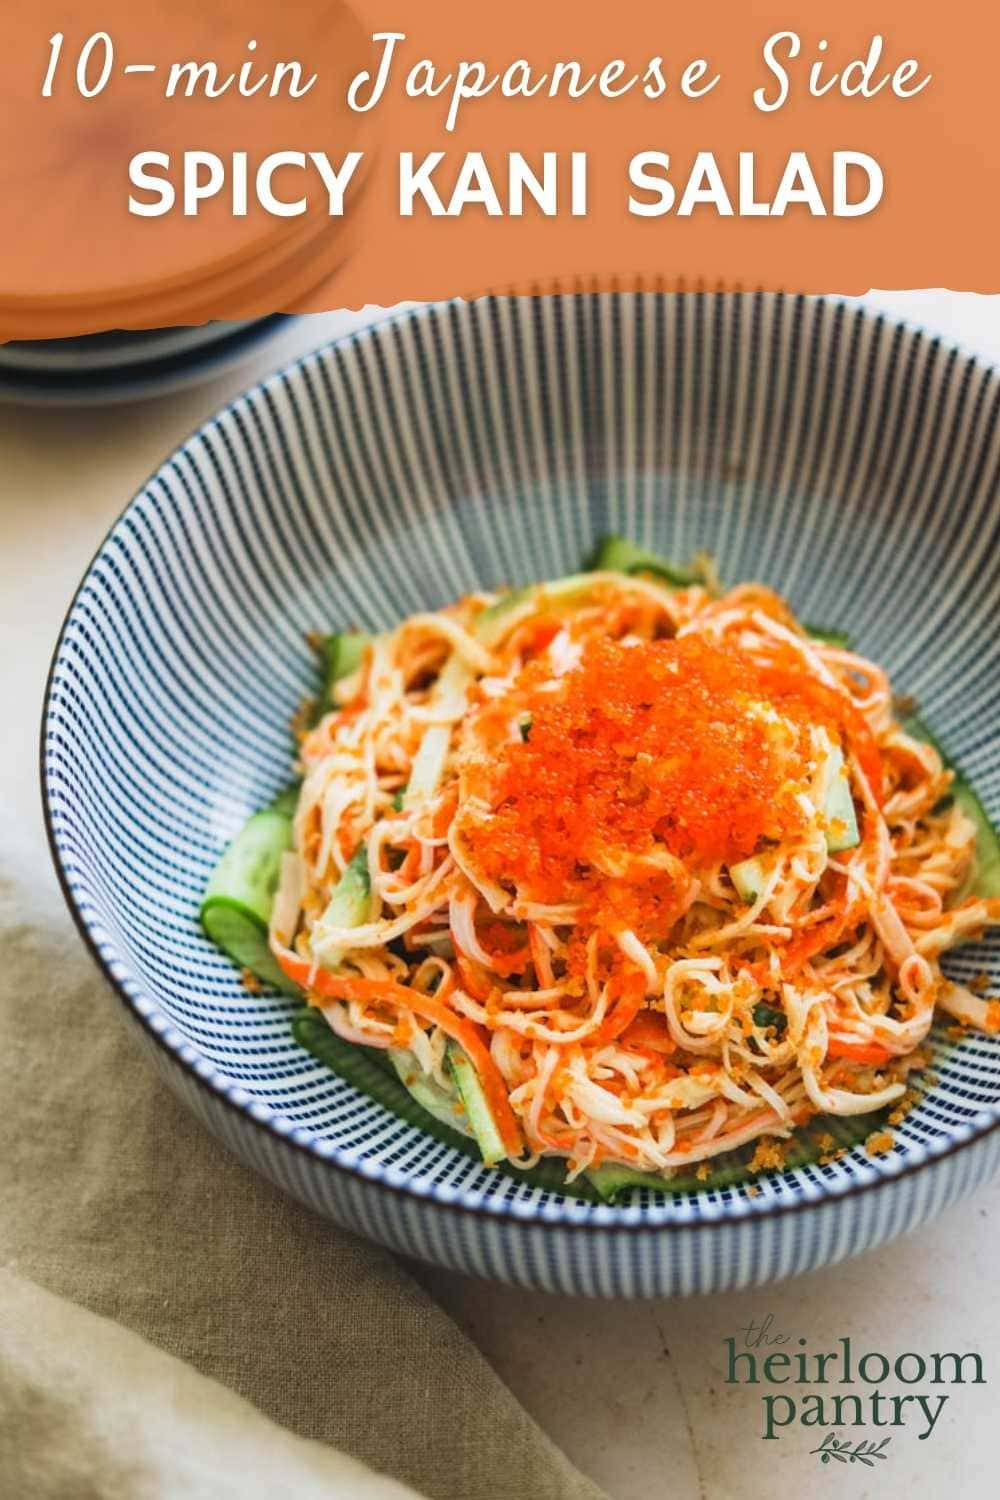 Spicy Kani Salad with tobiko and panko bread crumbs in a blue Japanese striped bowl for Pinterest.